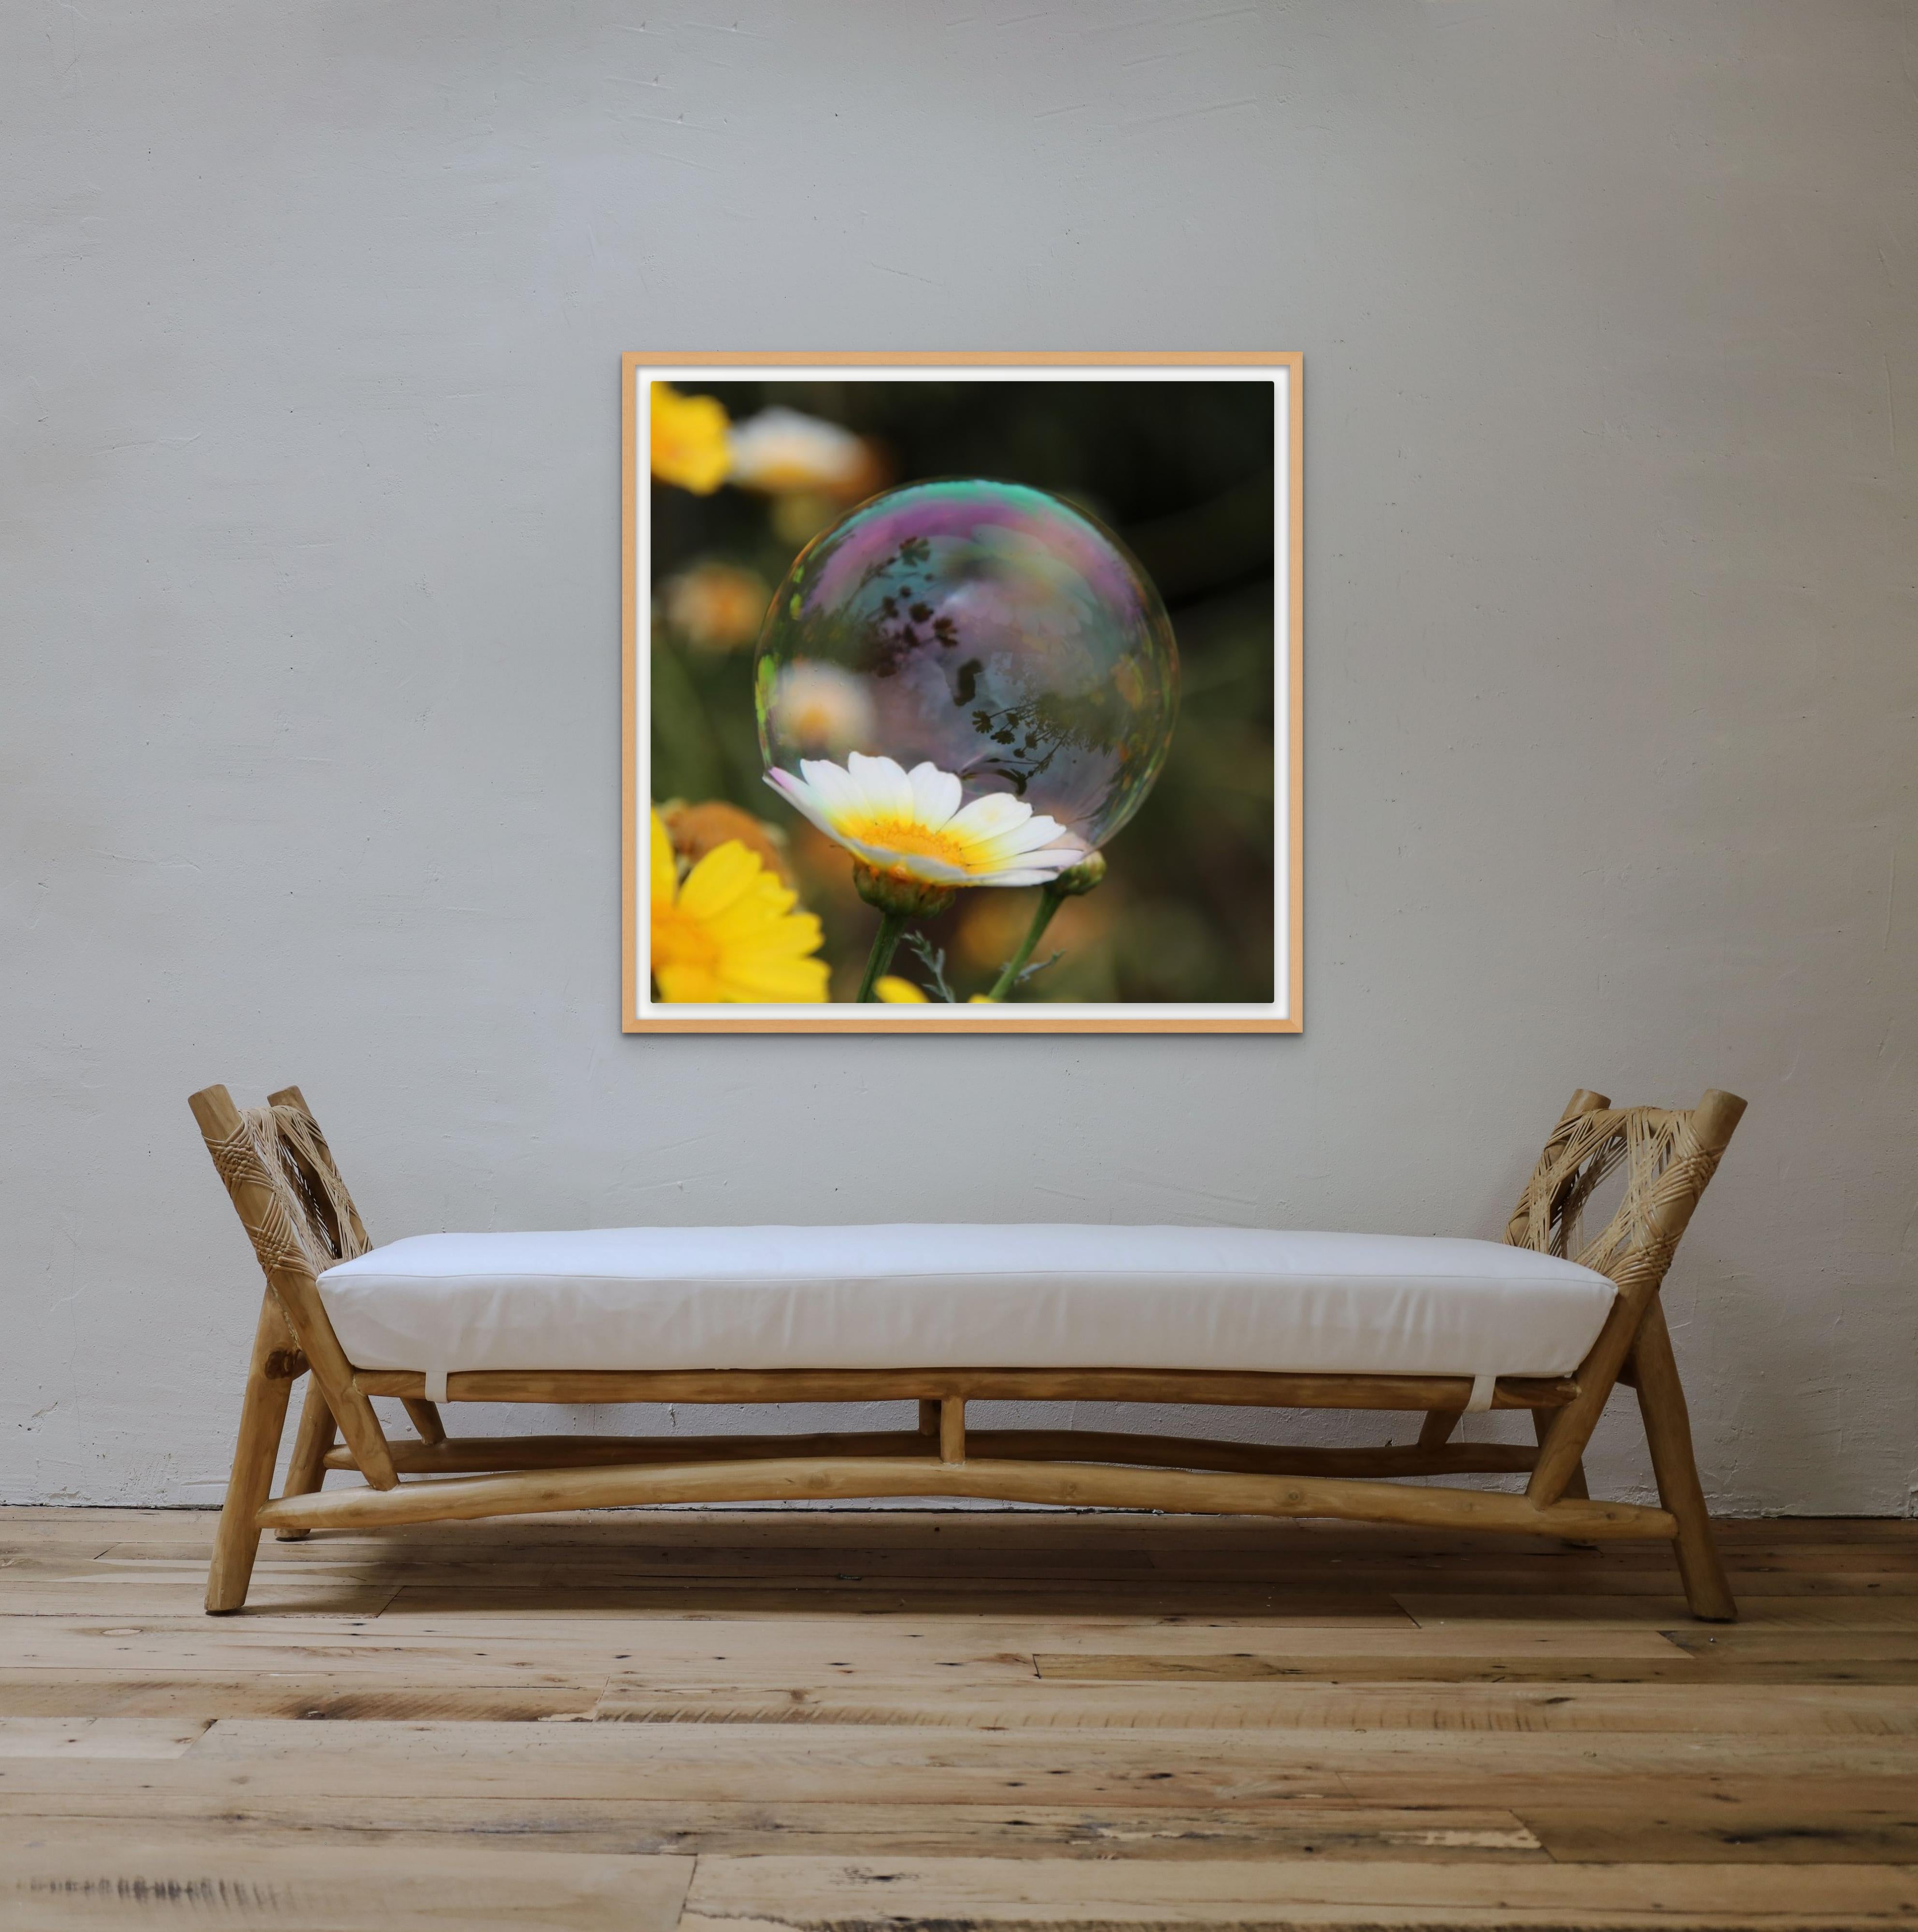 Photographic Print Edition on Paper
Available in Two sizes:
24 in x24 in, 25 in x 25 in framed
40 in x 40 in, 41 in x 41 in framed
2022
Available in Black, White, and Natural  float mount on paper
Framed to the edge of the board

Nature and